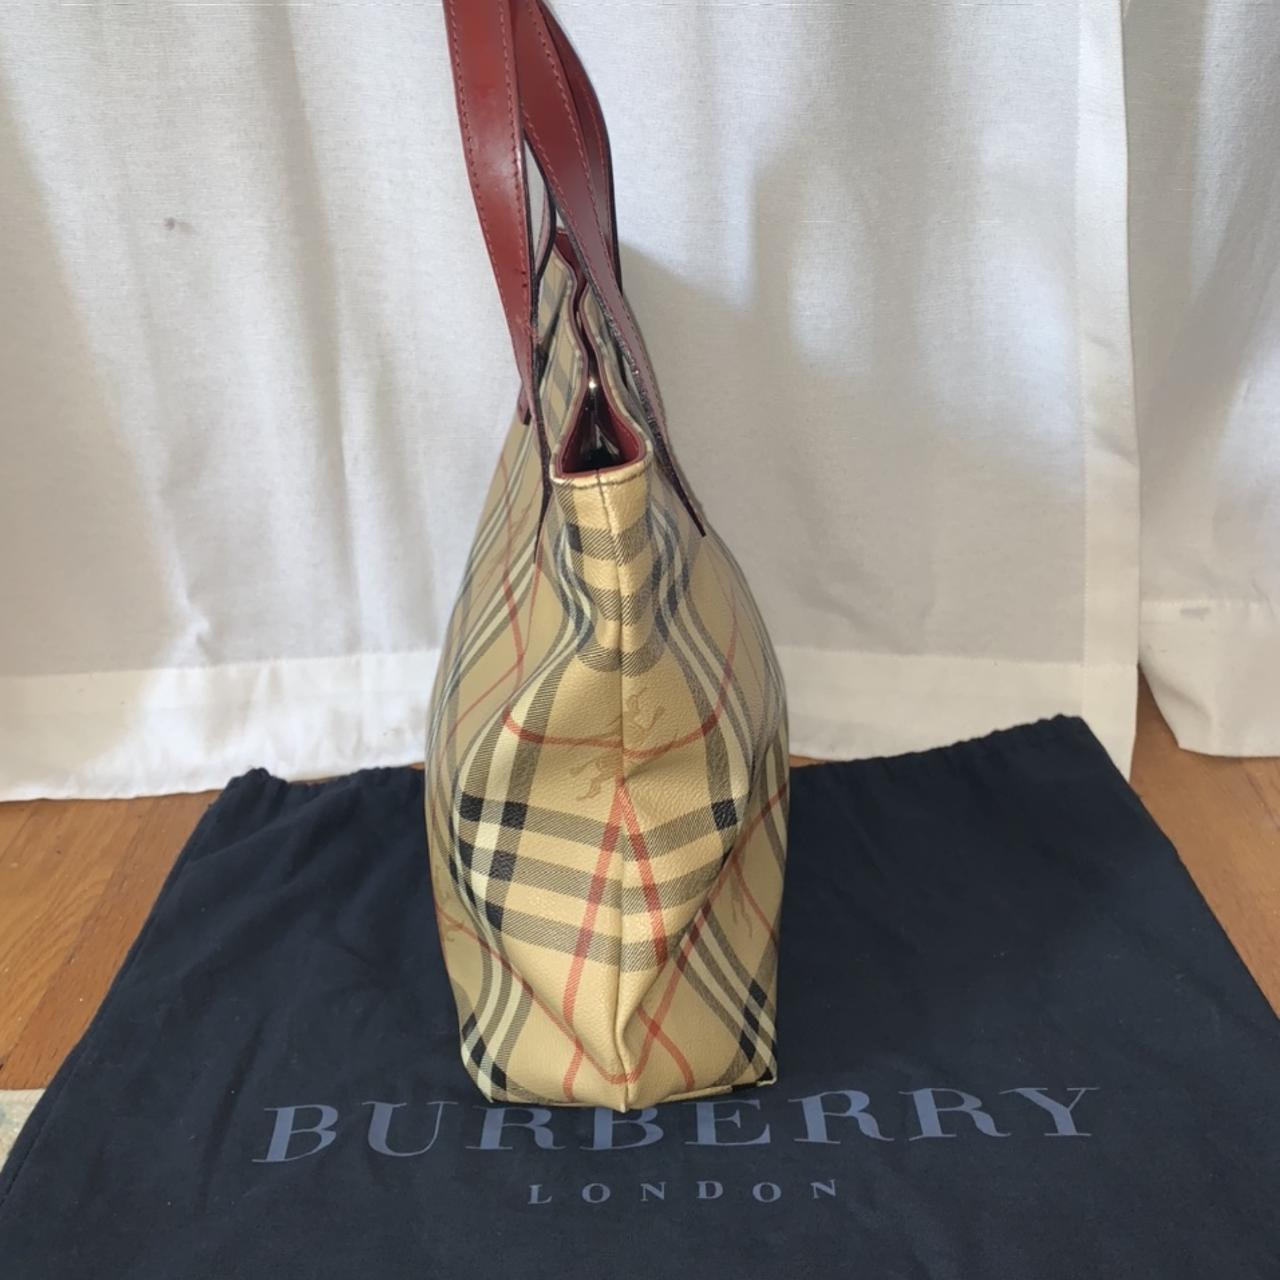 Little Used - Authentic Burberry bag with dust bag made from